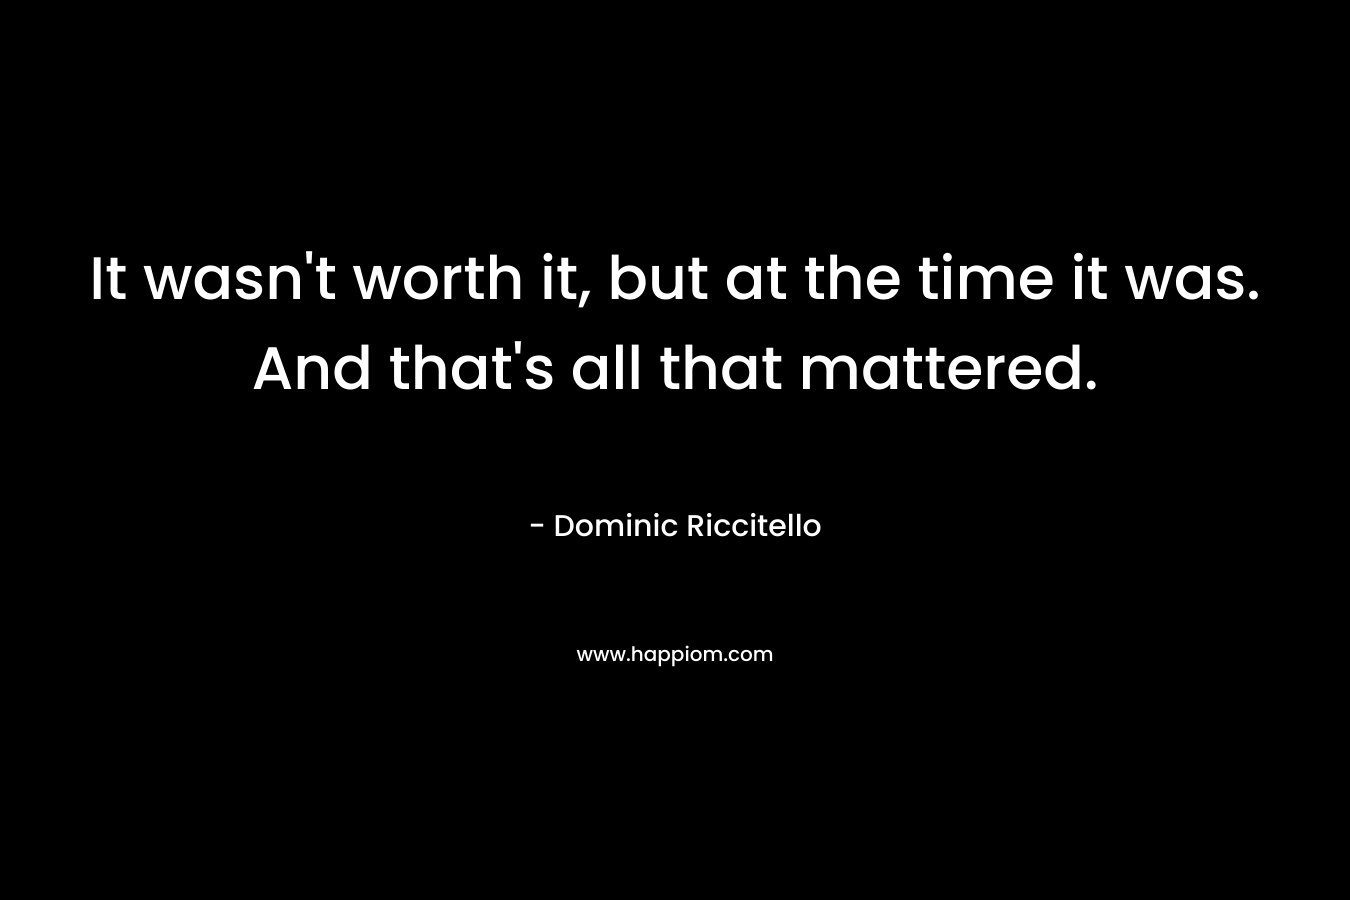 It wasn’t worth it, but at the time it was. And that’s all that mattered. – Dominic Riccitello